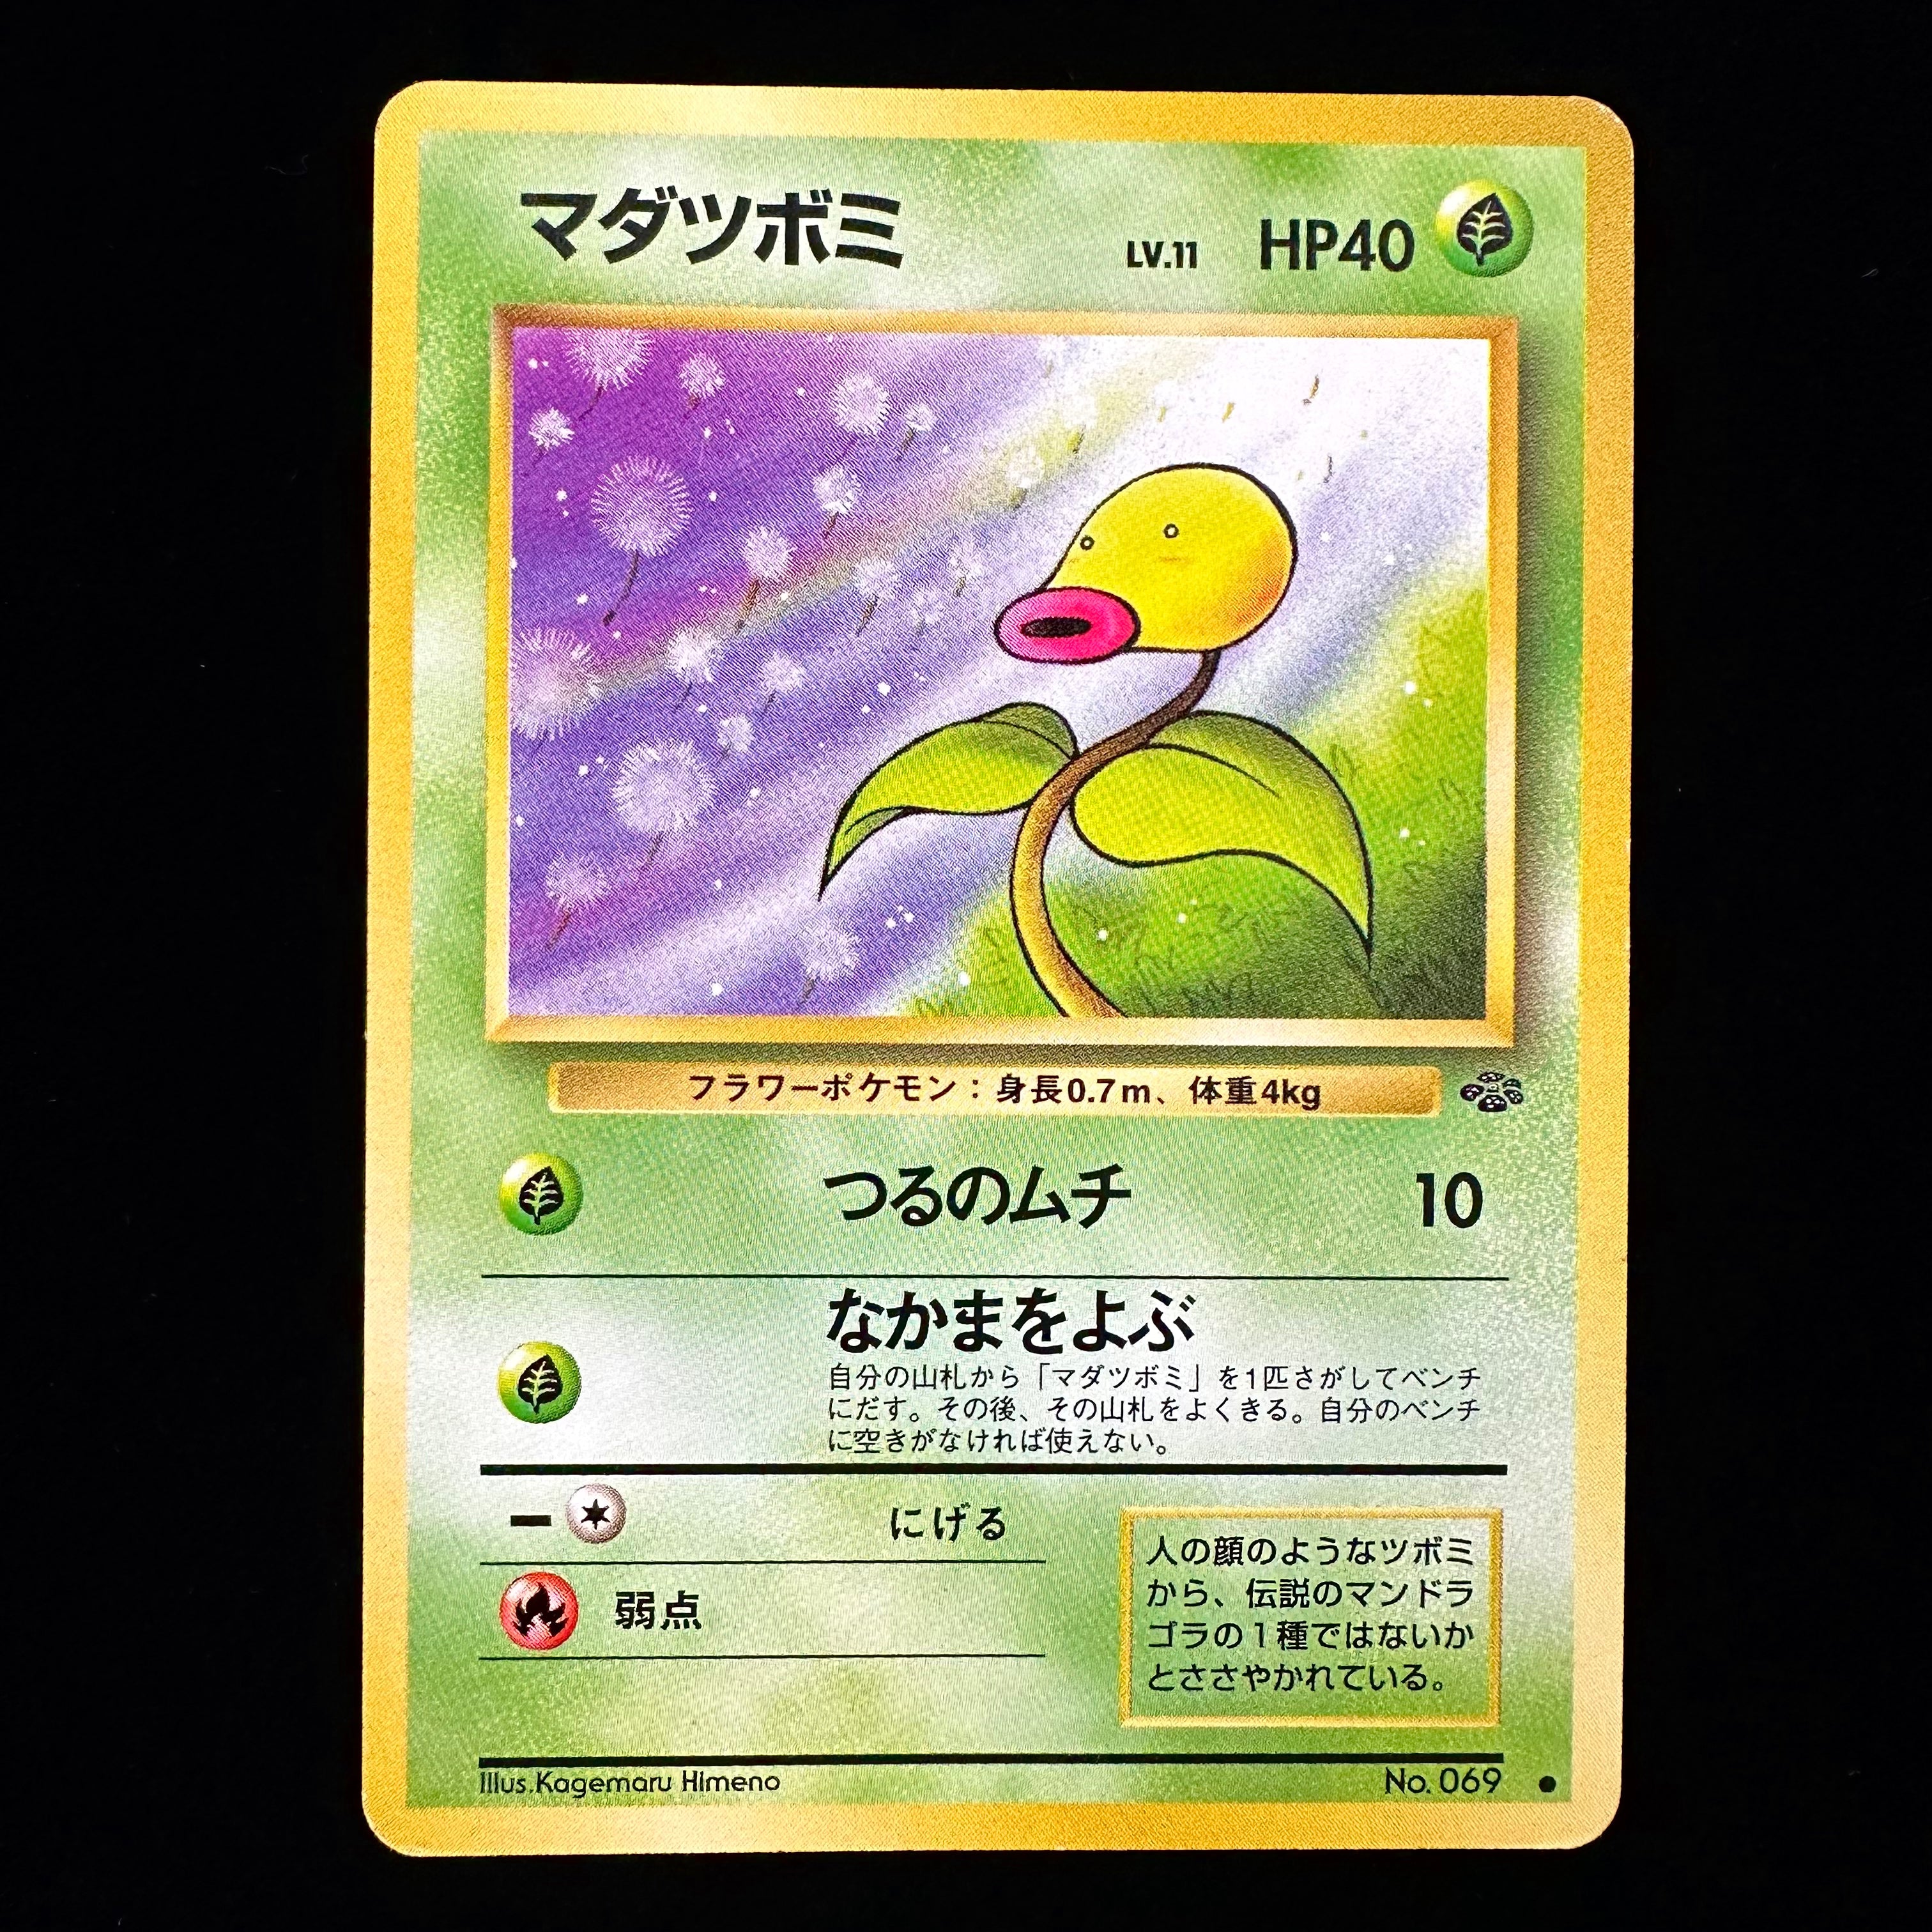 POCKET MONSTERS CARD GAME Bellsprout - Jungle